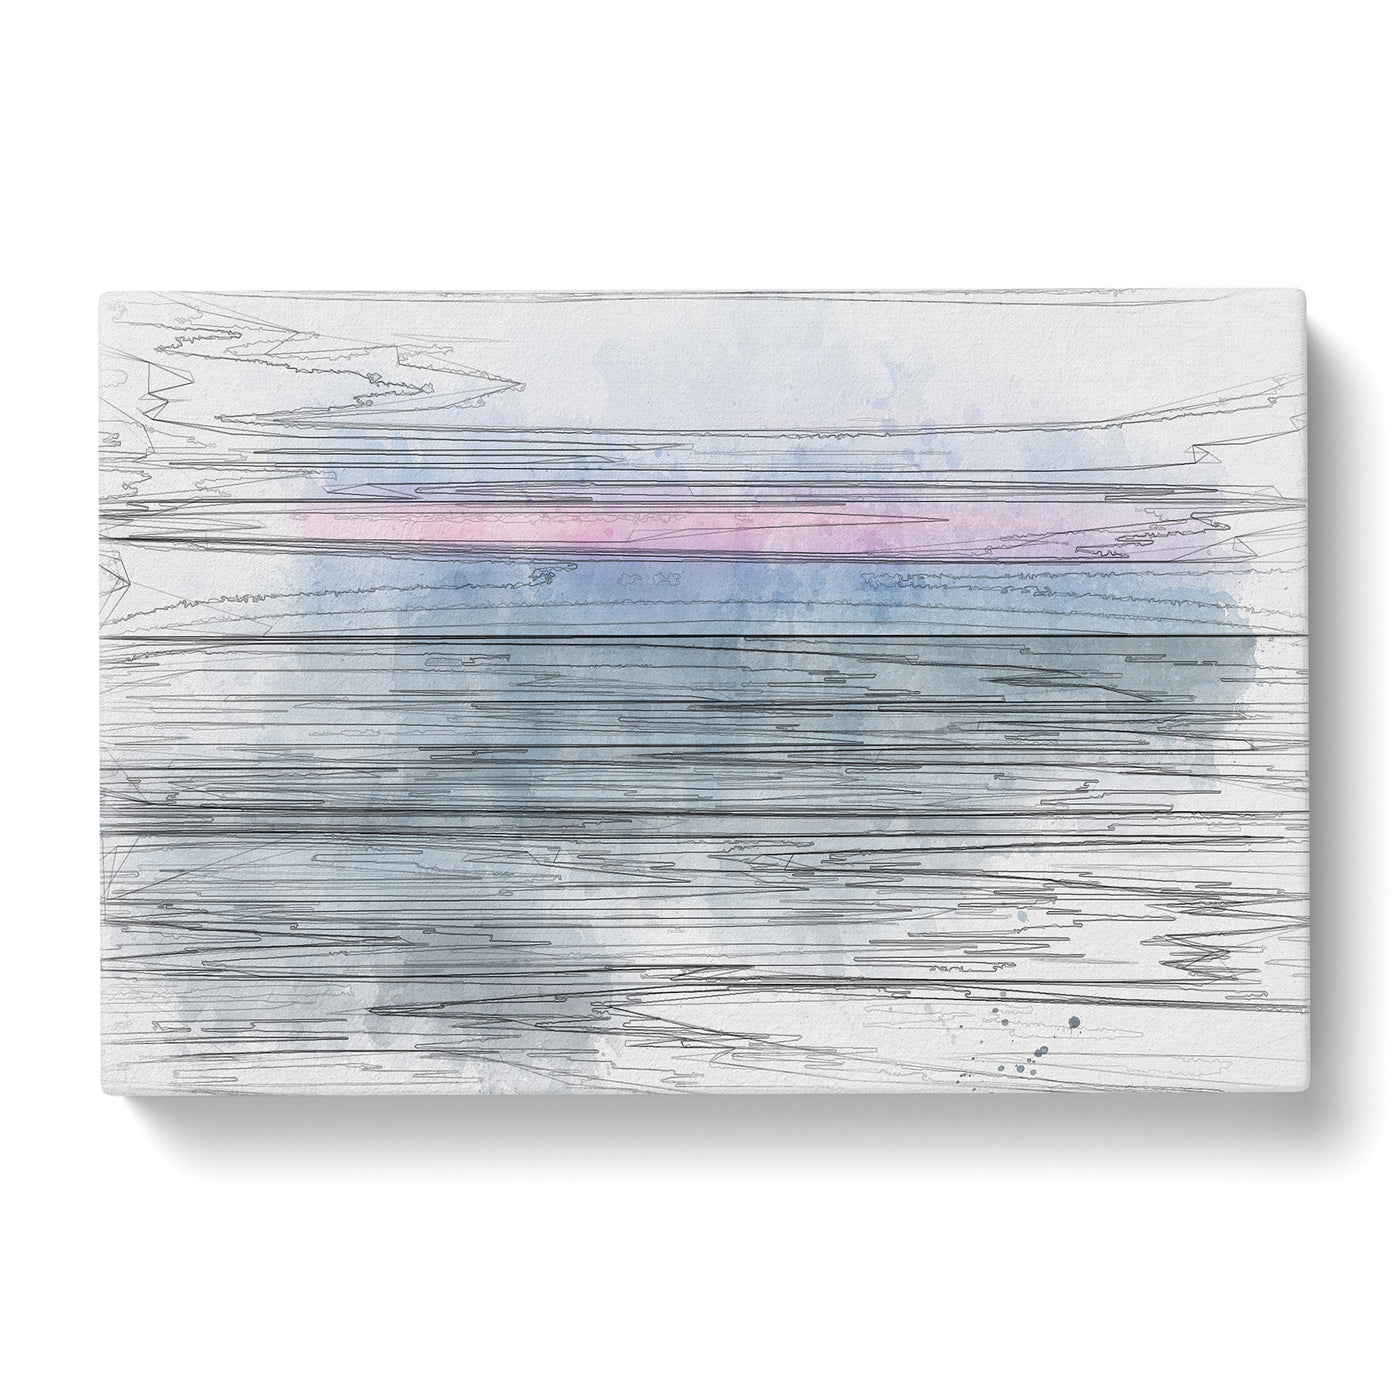 The Horizon In Abstract Canvas Print Main Image